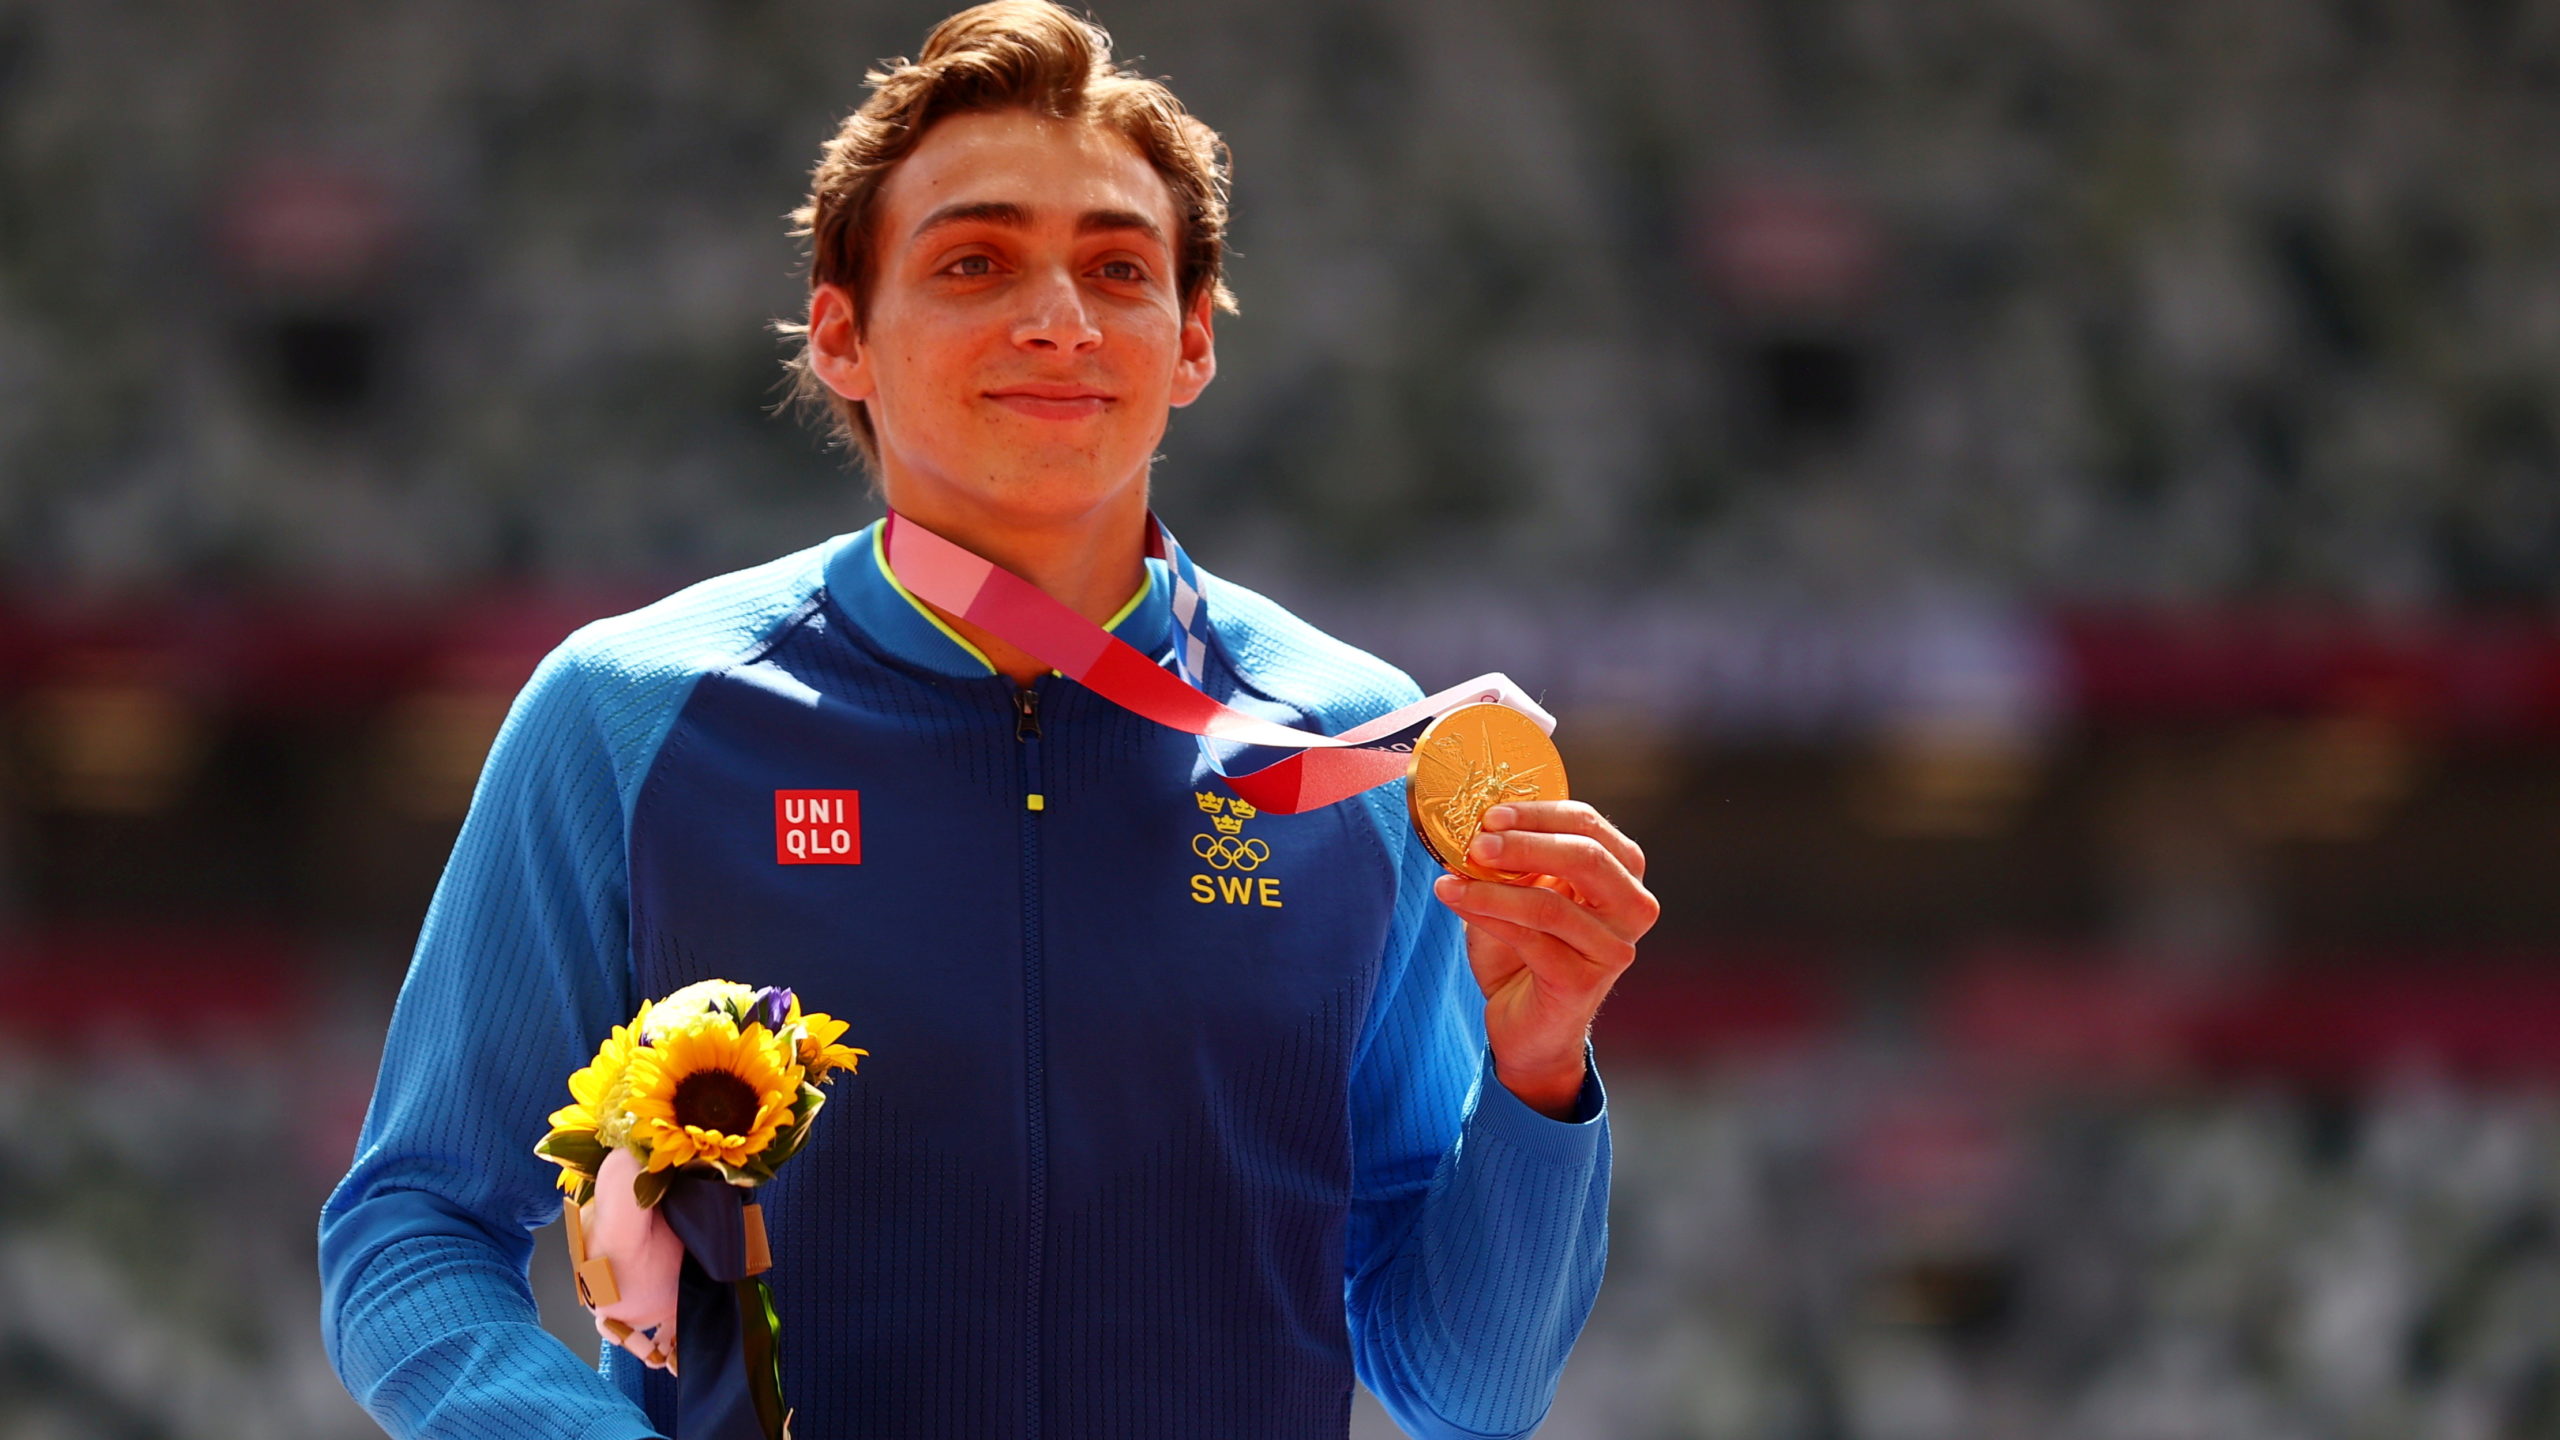  Armand Duplantis of Sweden celebrates with his gold medal